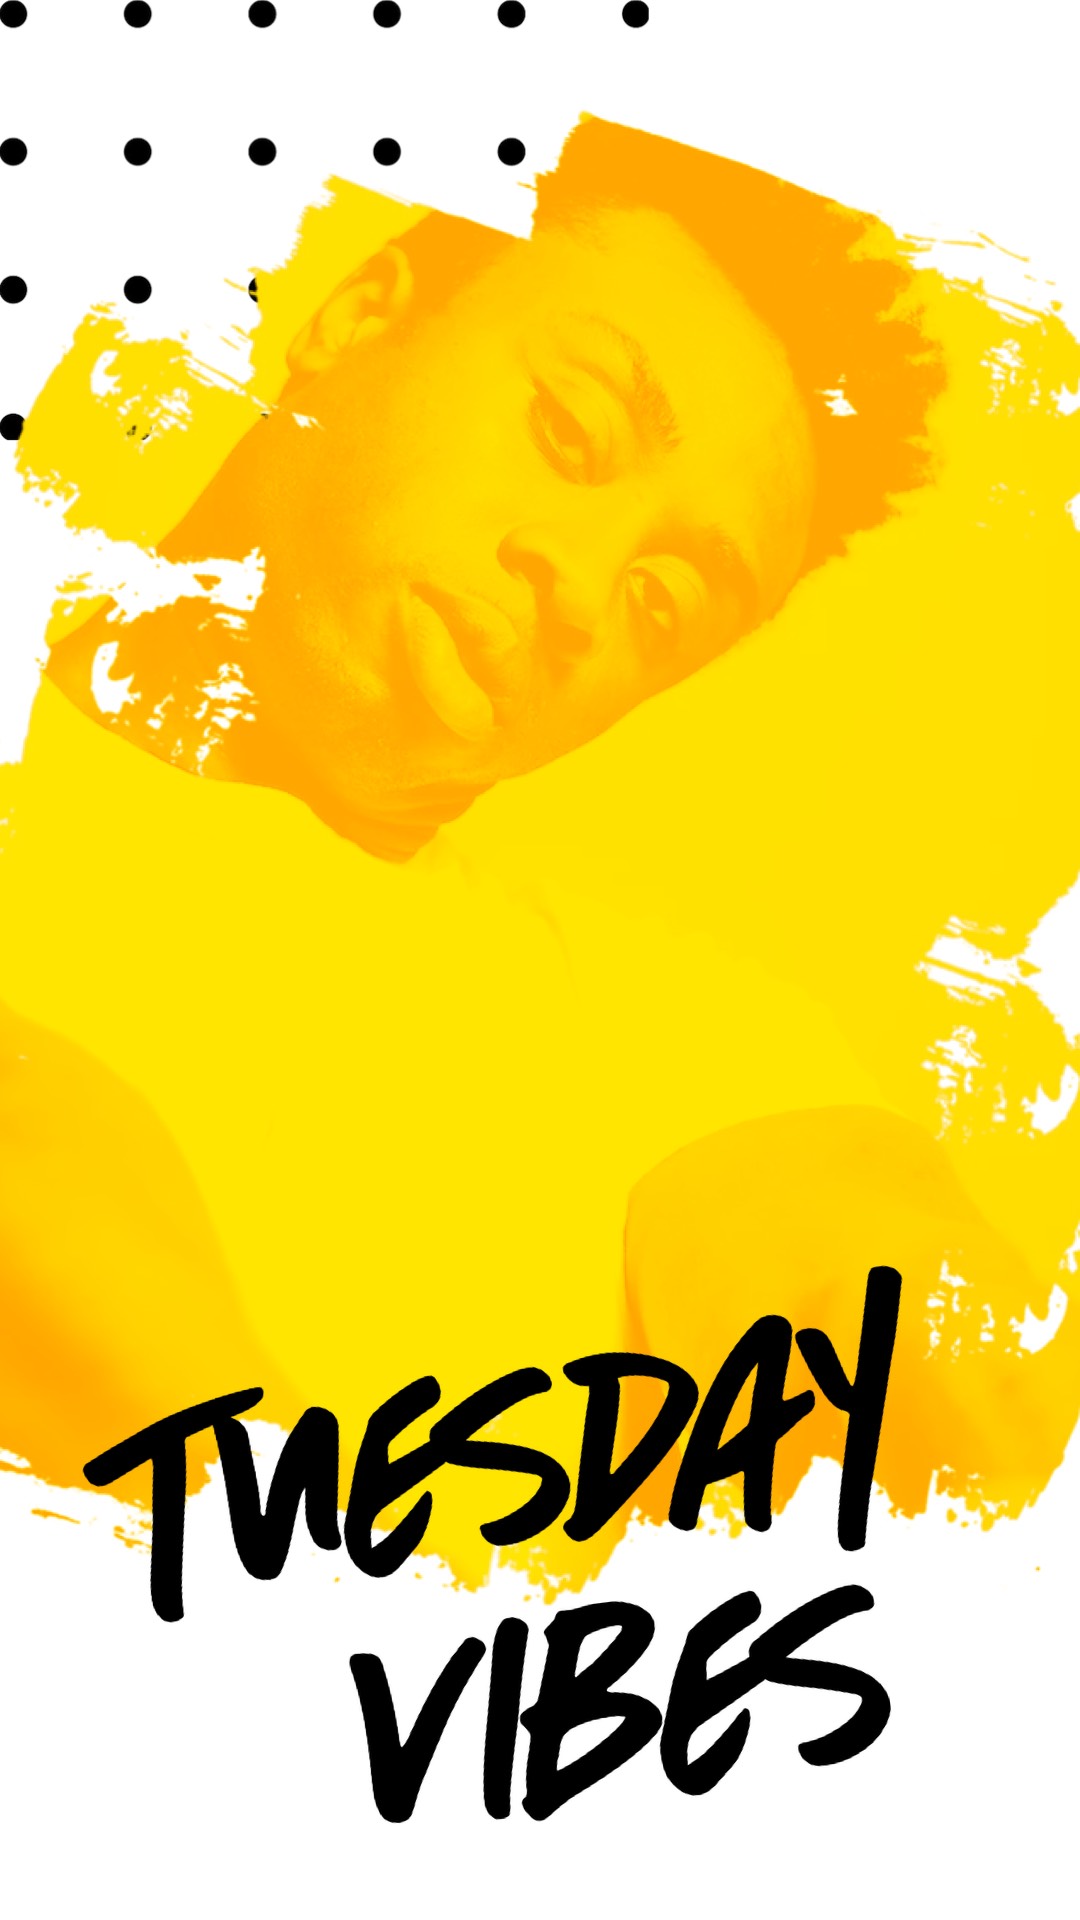 Tuesday vibes cool instagram story template